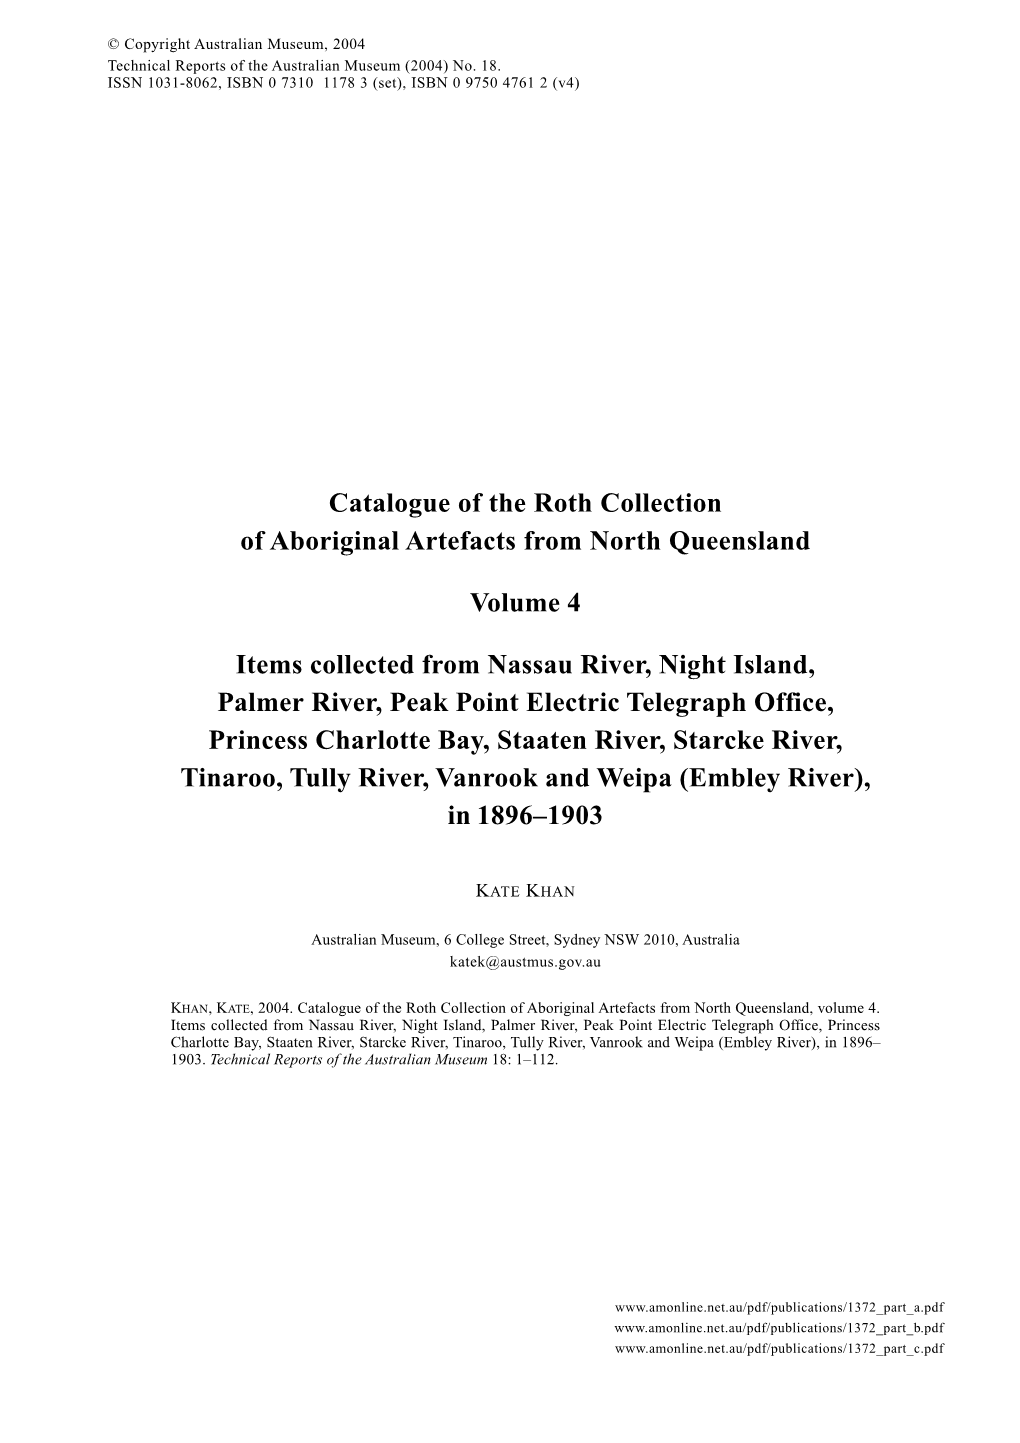 Catalogue of the Roth Collection of Aboriginal Artefacts from North Queensland